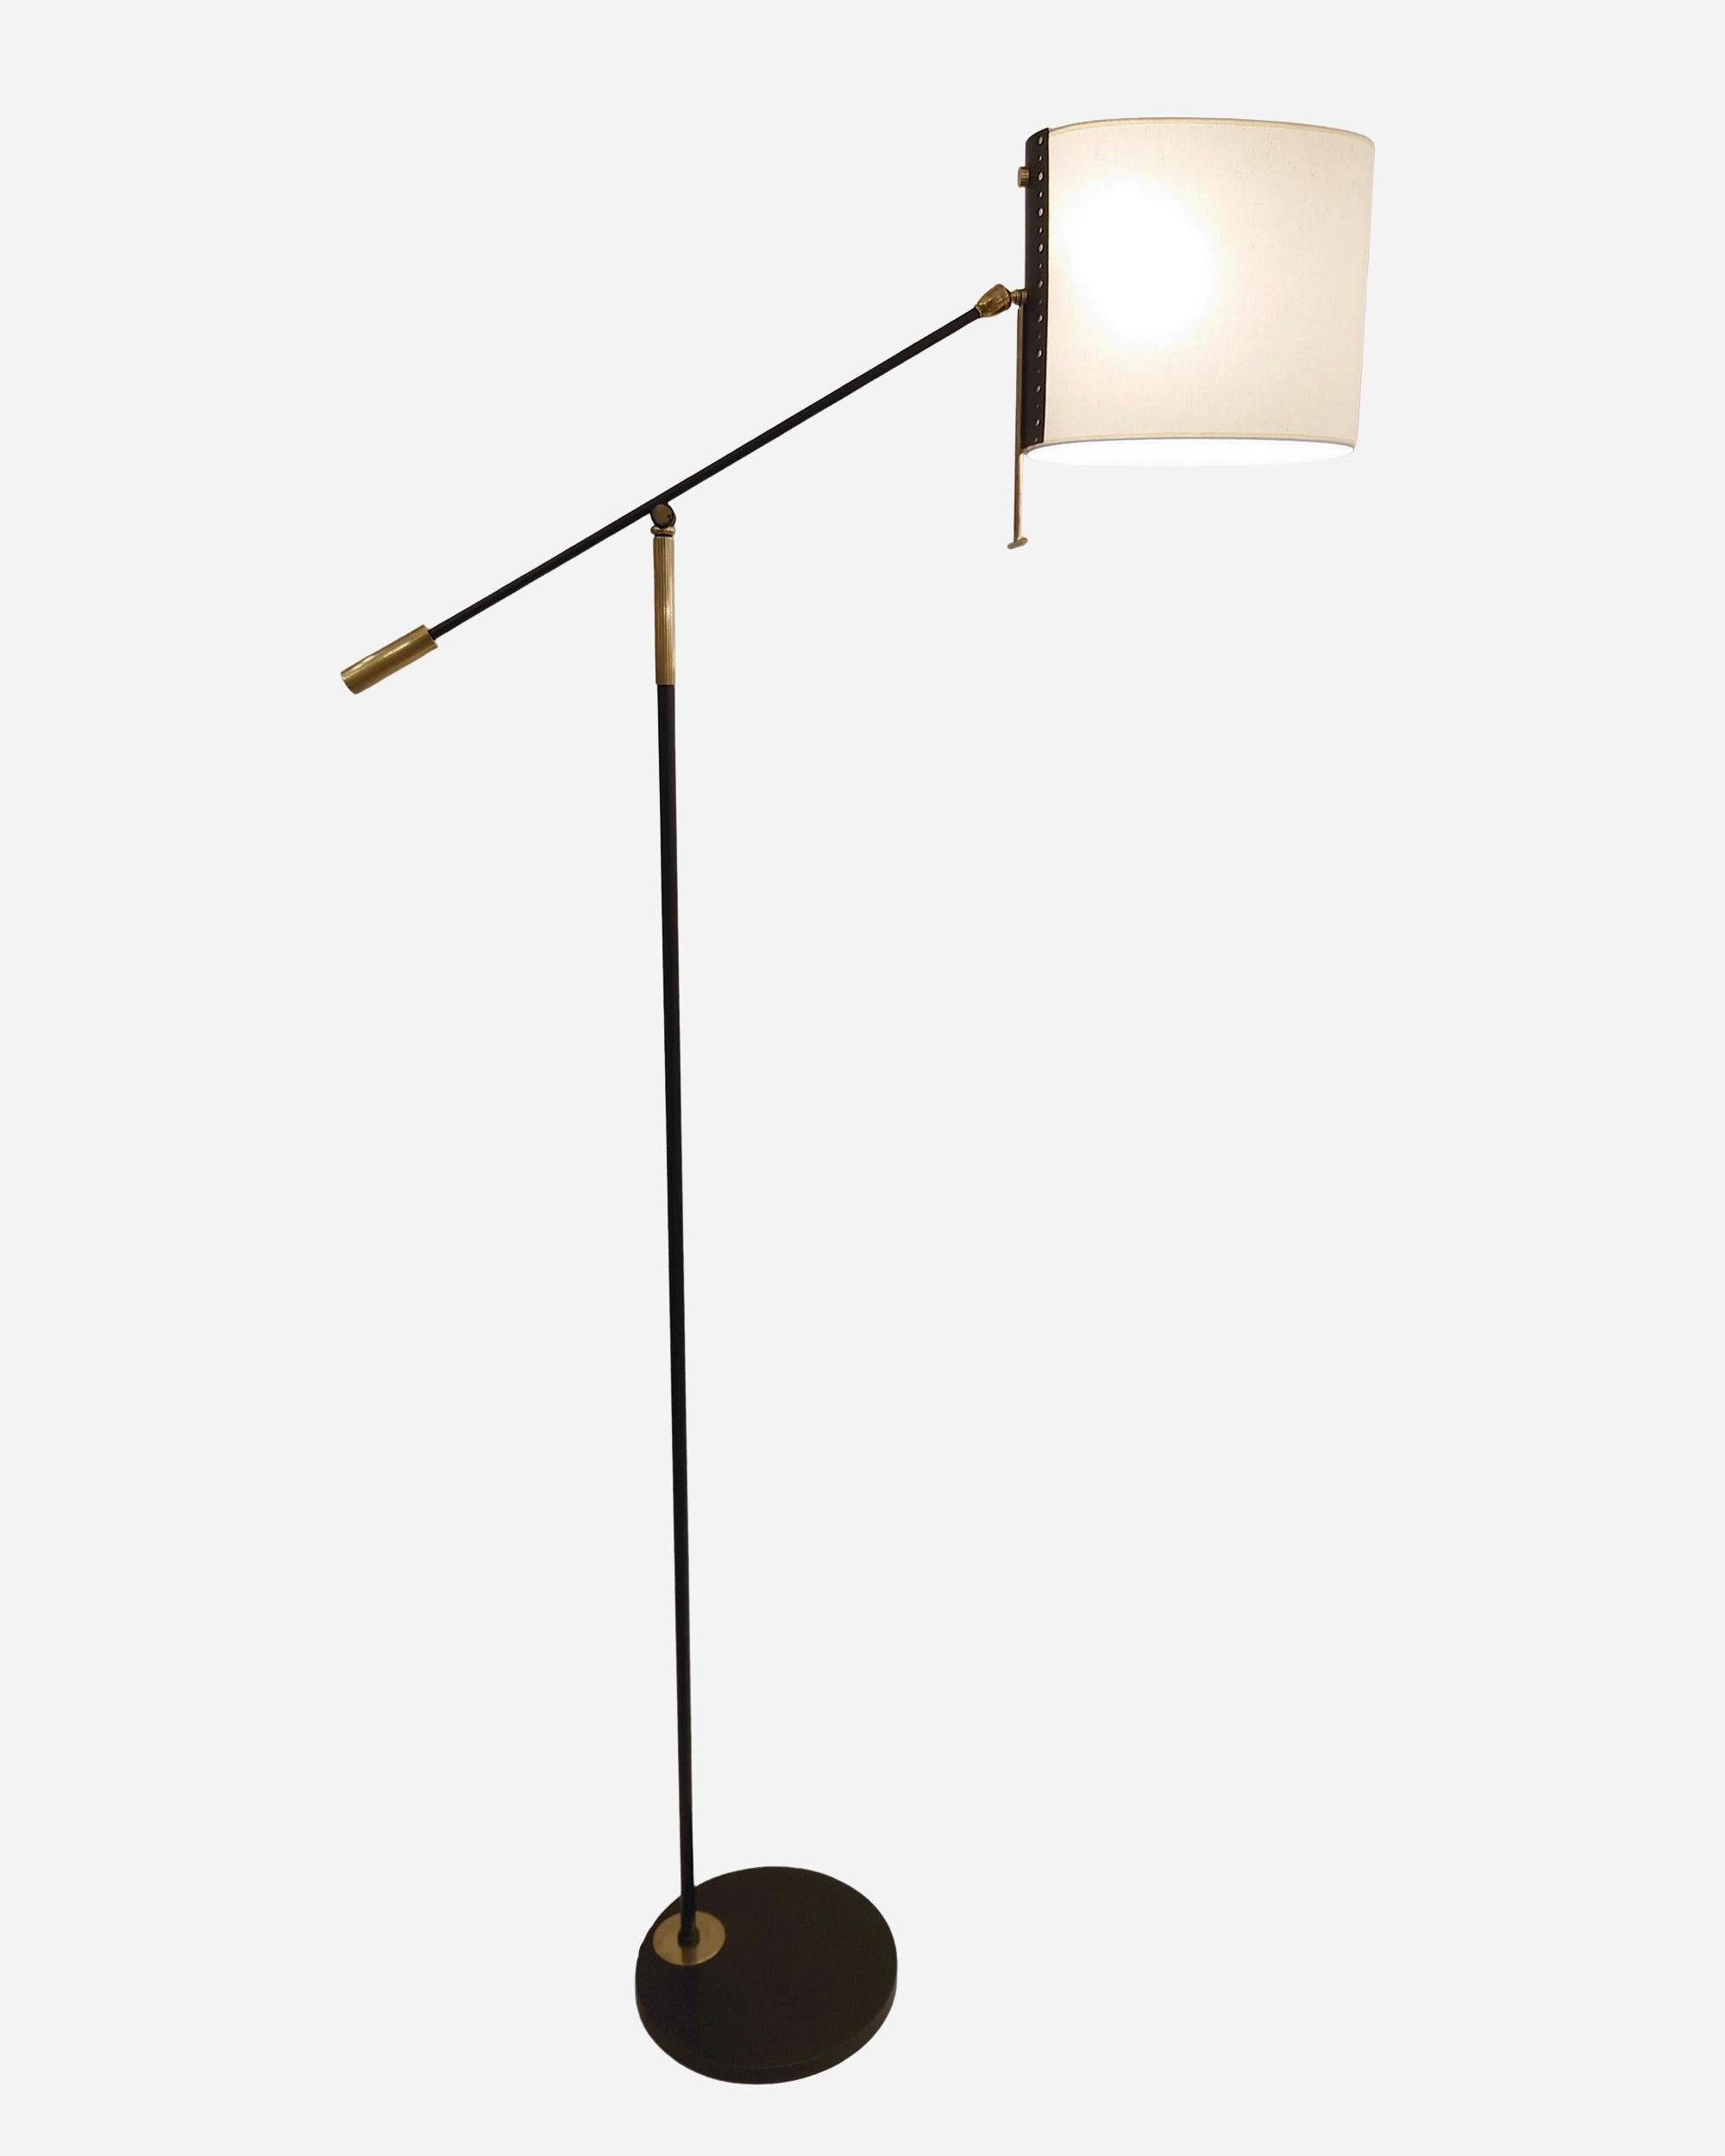 Pendulum floor lamp in polished brass and black-lacquered metal. The eccentric oval lampshade is mounted on a ball-and-socket joint to direct the light.
Off-white cotton shade.
Height: 180 cm (70.8 inches)
Width: 30 cm (11.8 inches)
Depth: 100 cm